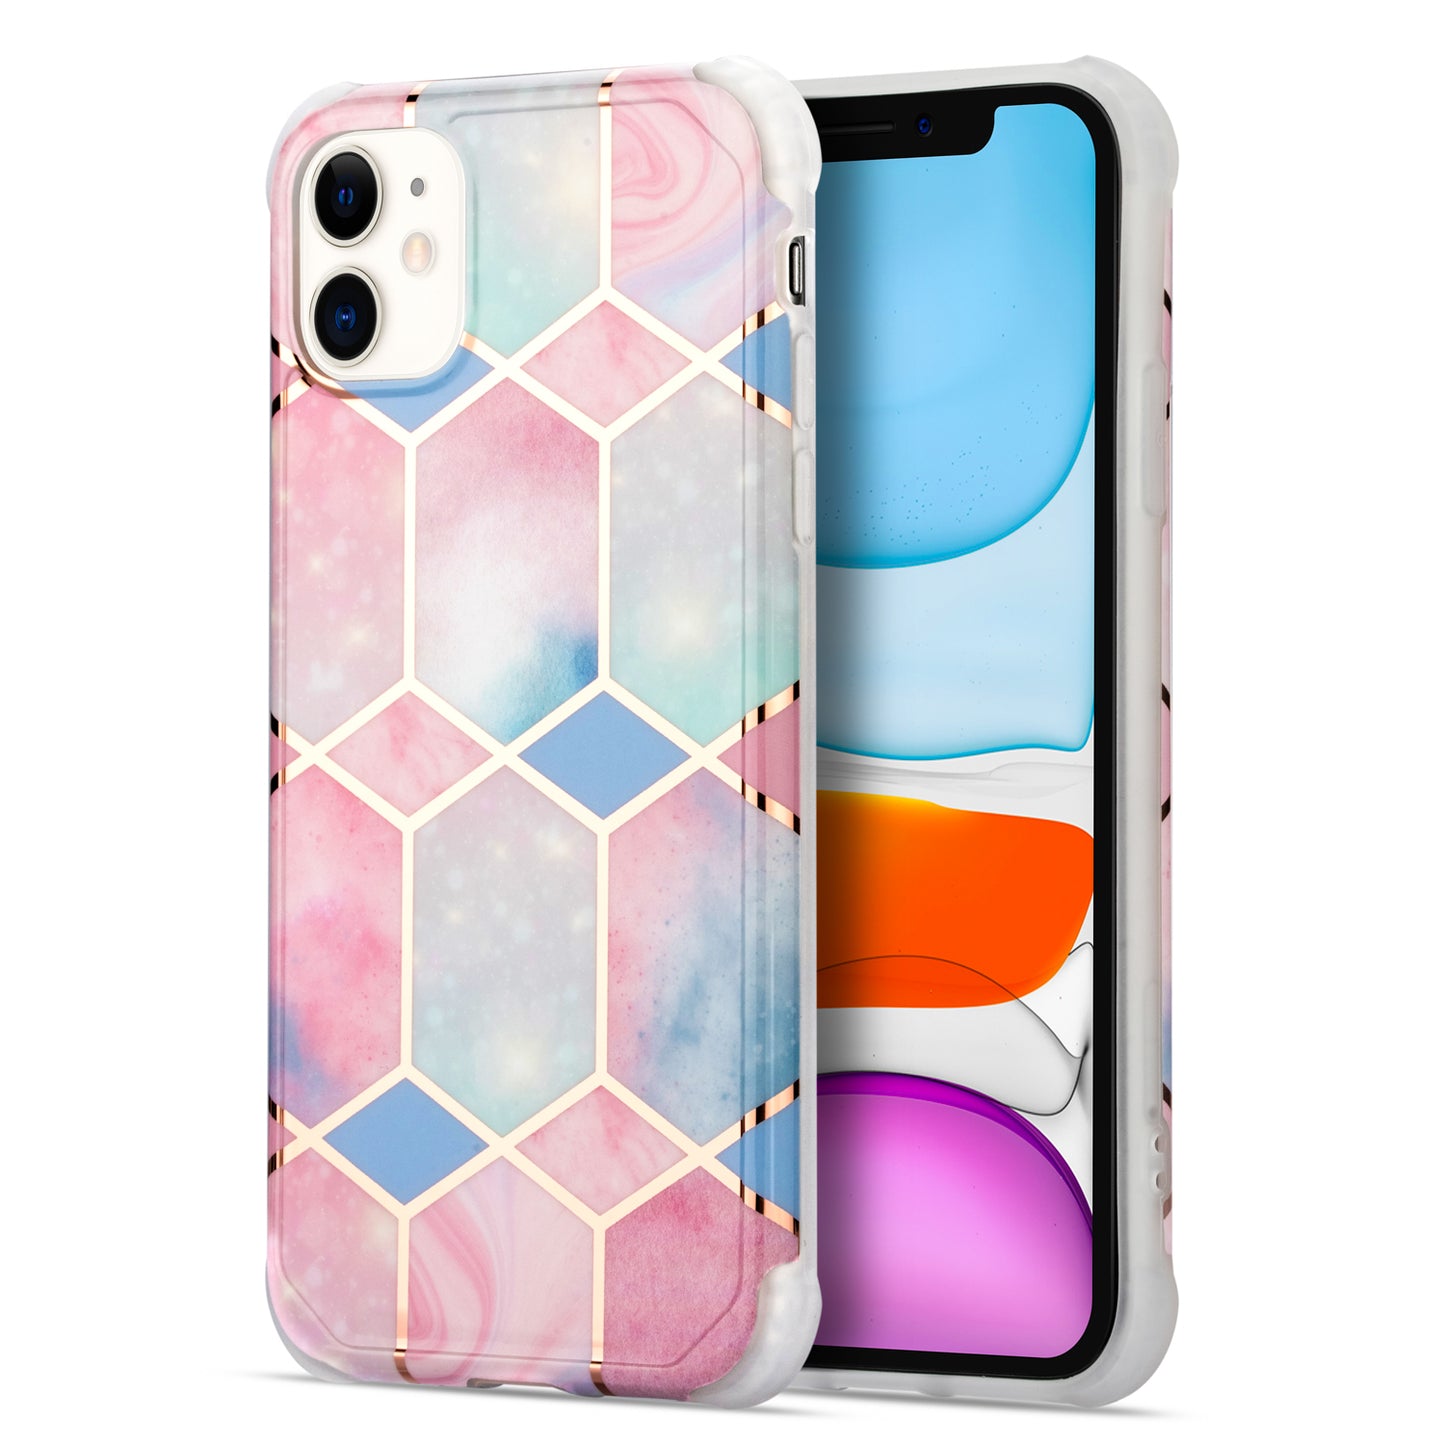 iPhone 12, 11, XR & other Covers